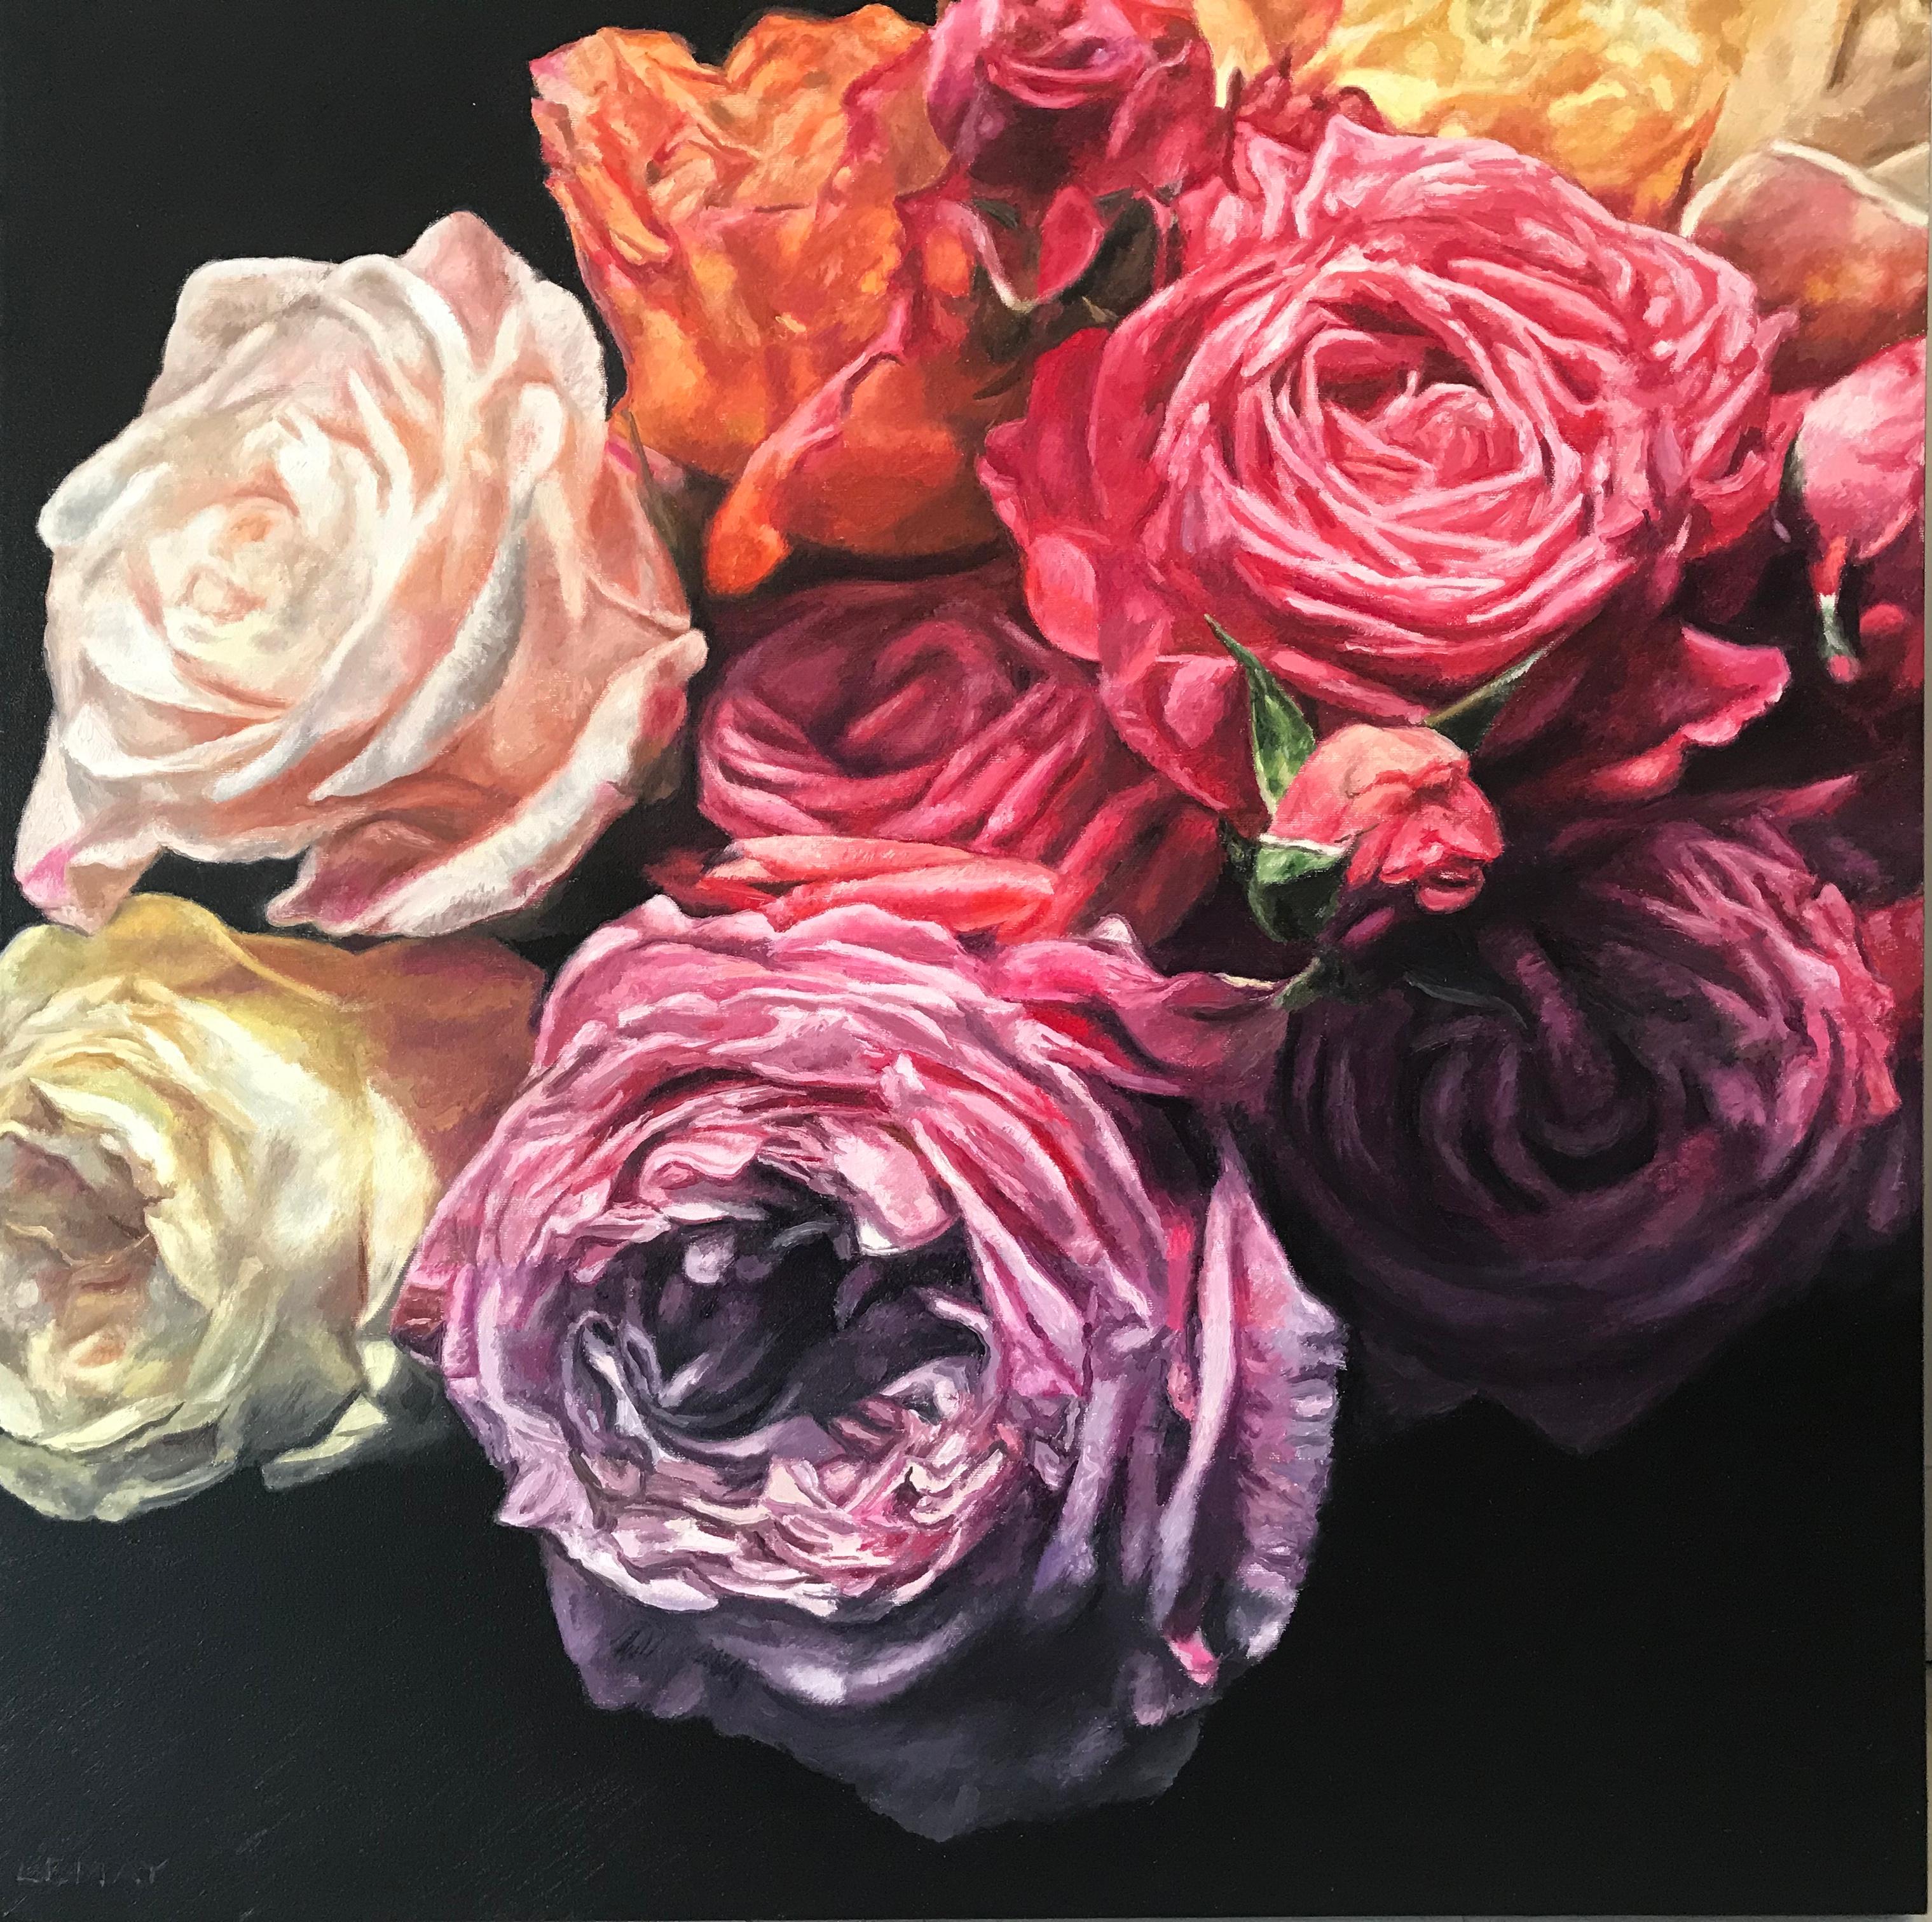 Robert Lemay Landscape Painting - Garden Roses II - original floral still oil painting contemporary hyperrealism